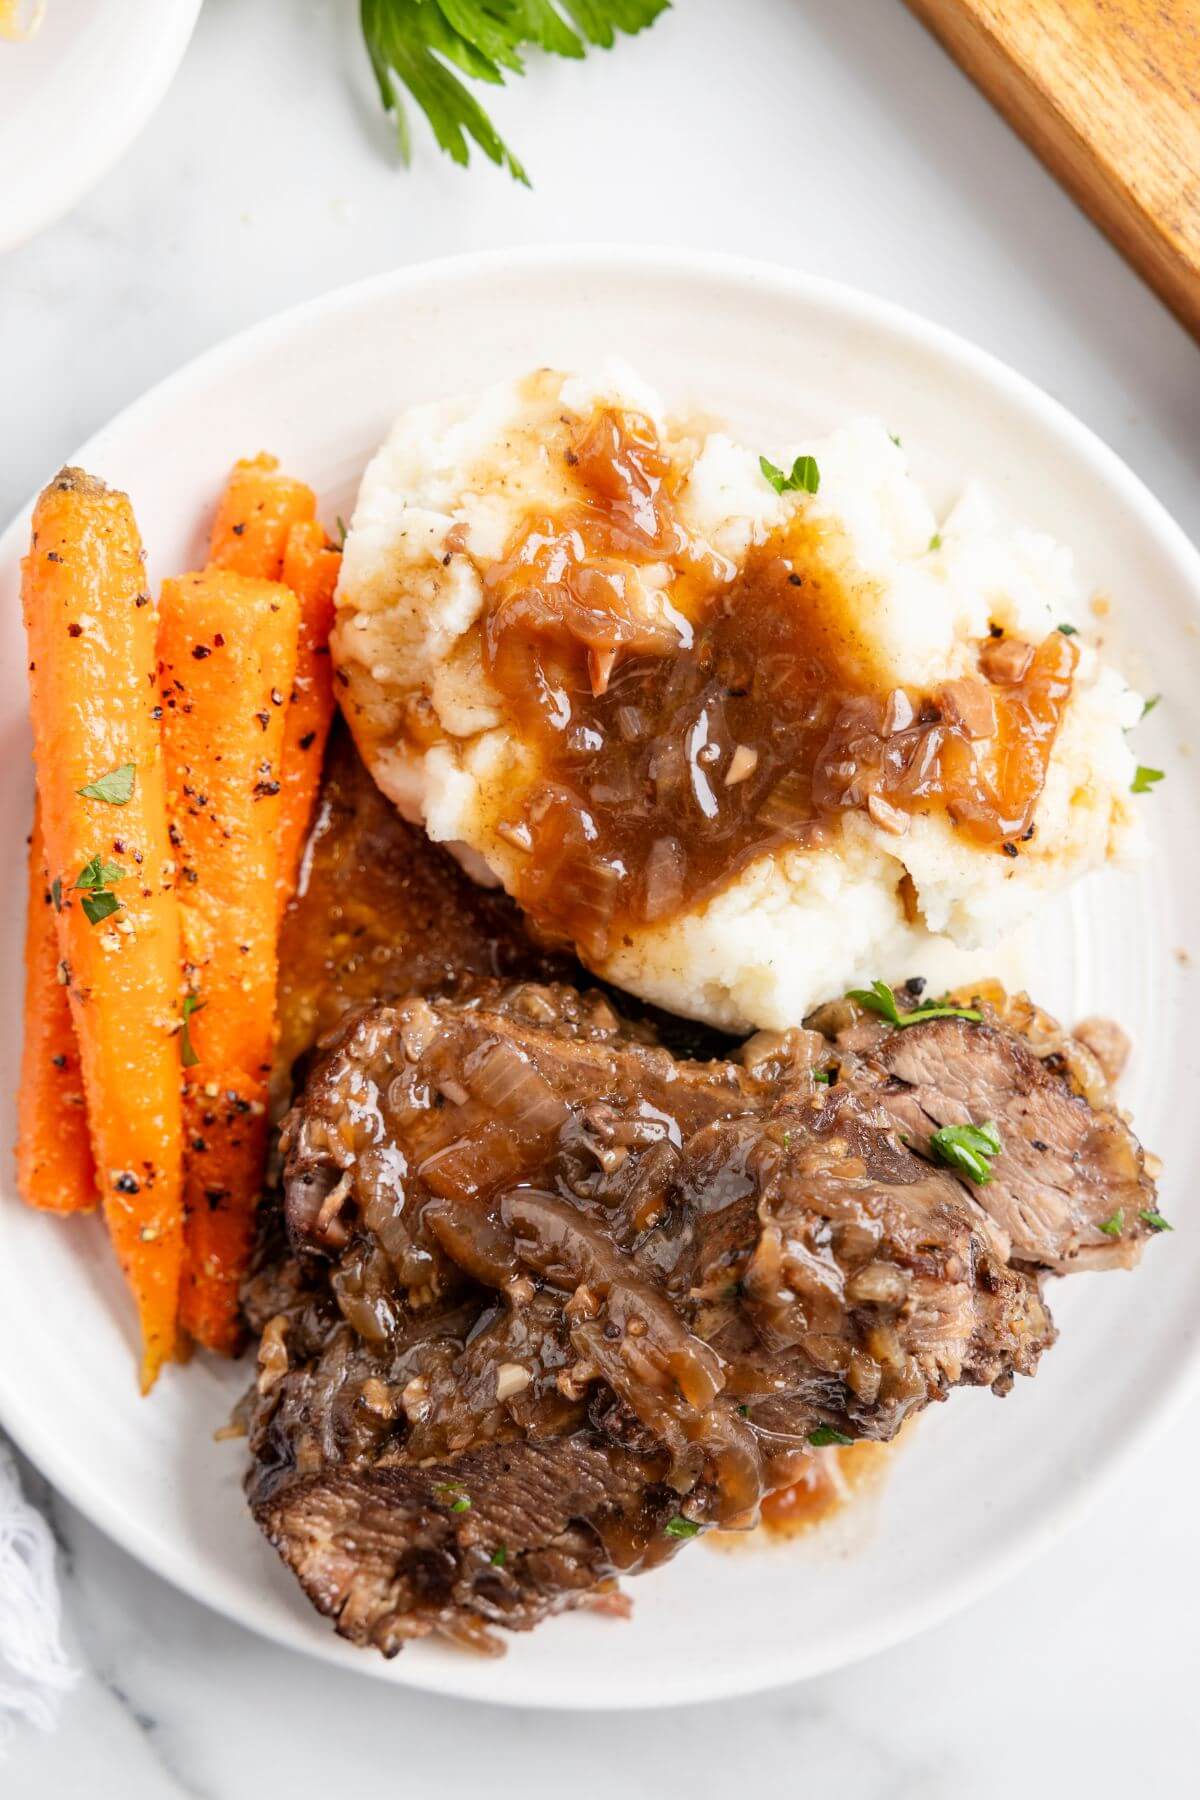 Mashed potatoes and gravy, glazed carrots, and brisket are served on a white plate.